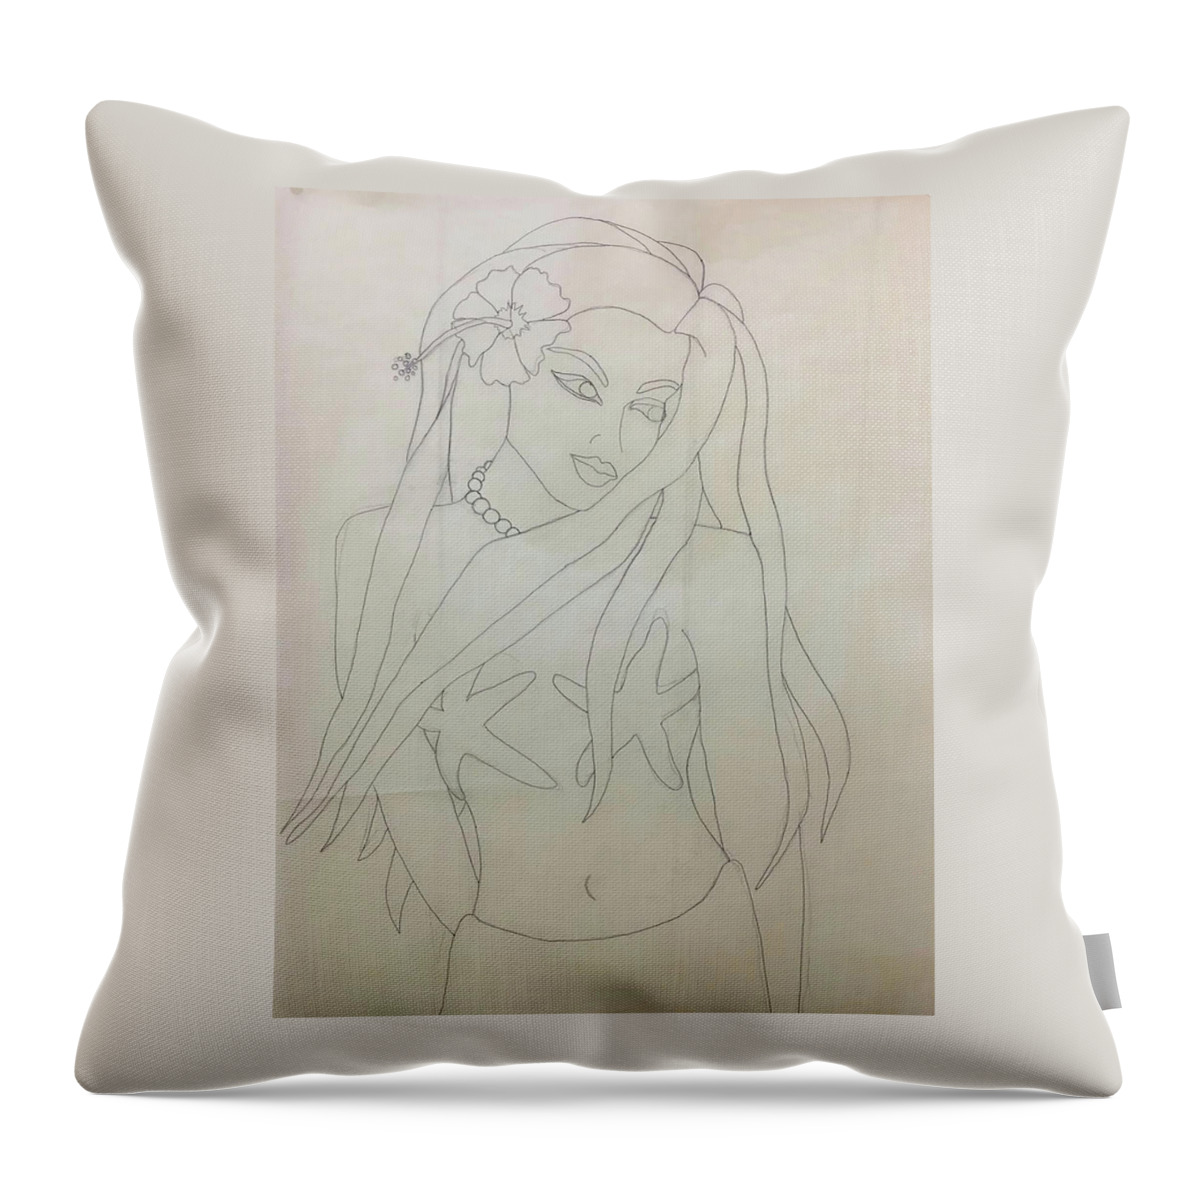 Mermaid Throw Pillow featuring the drawing Island Innocence by Kelly Smith